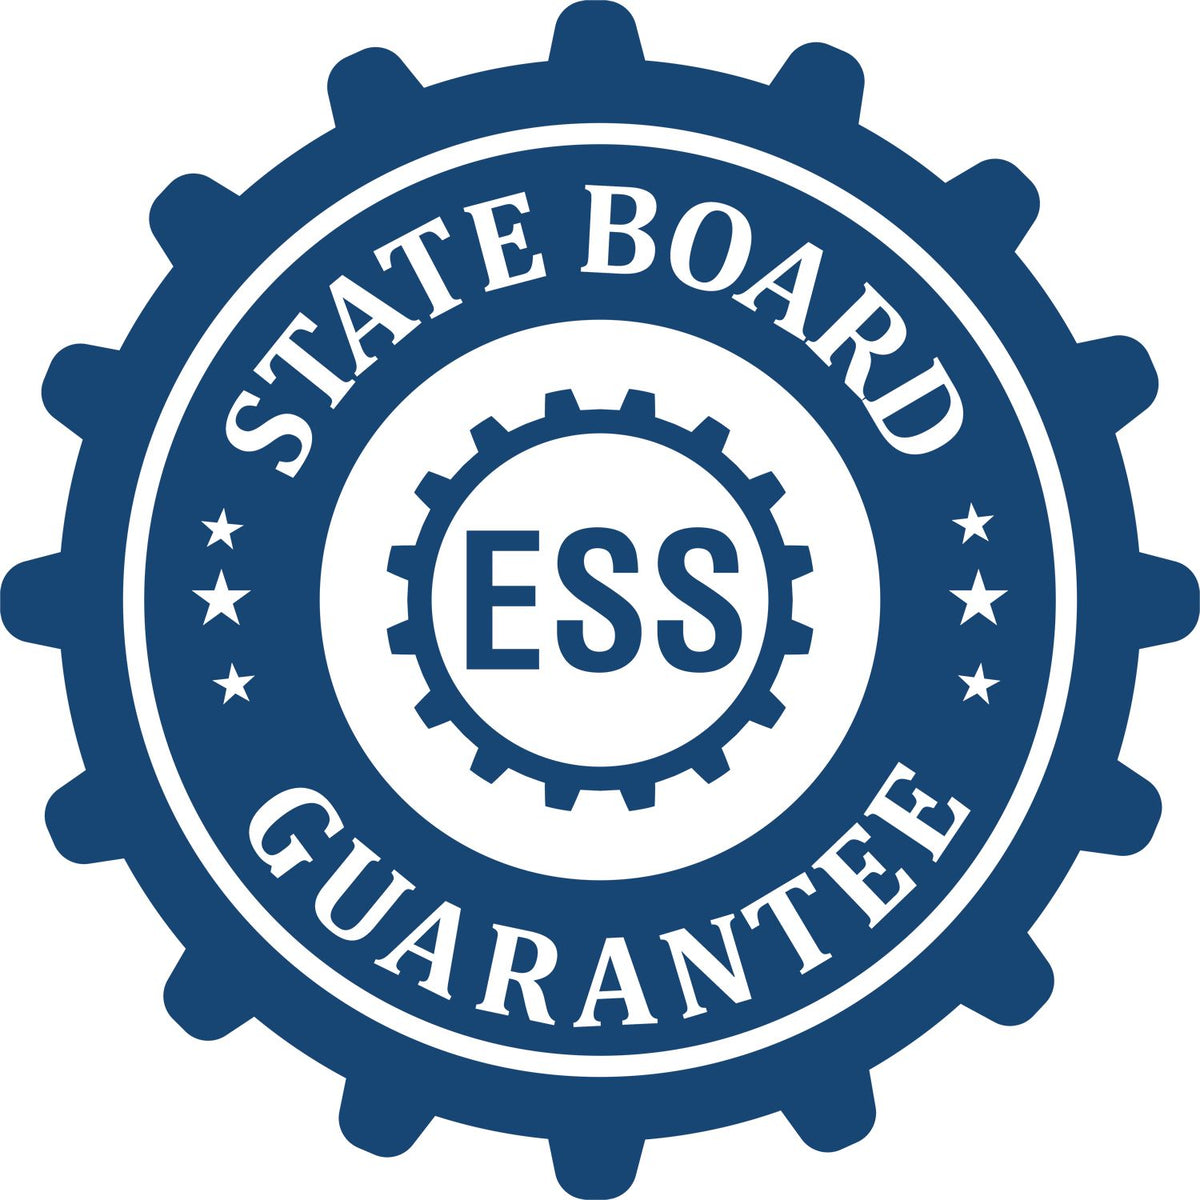 An emblem in a gear shape illustrating a state board guarantee for the Mississippi Desk Surveyor Seal Embosser product.